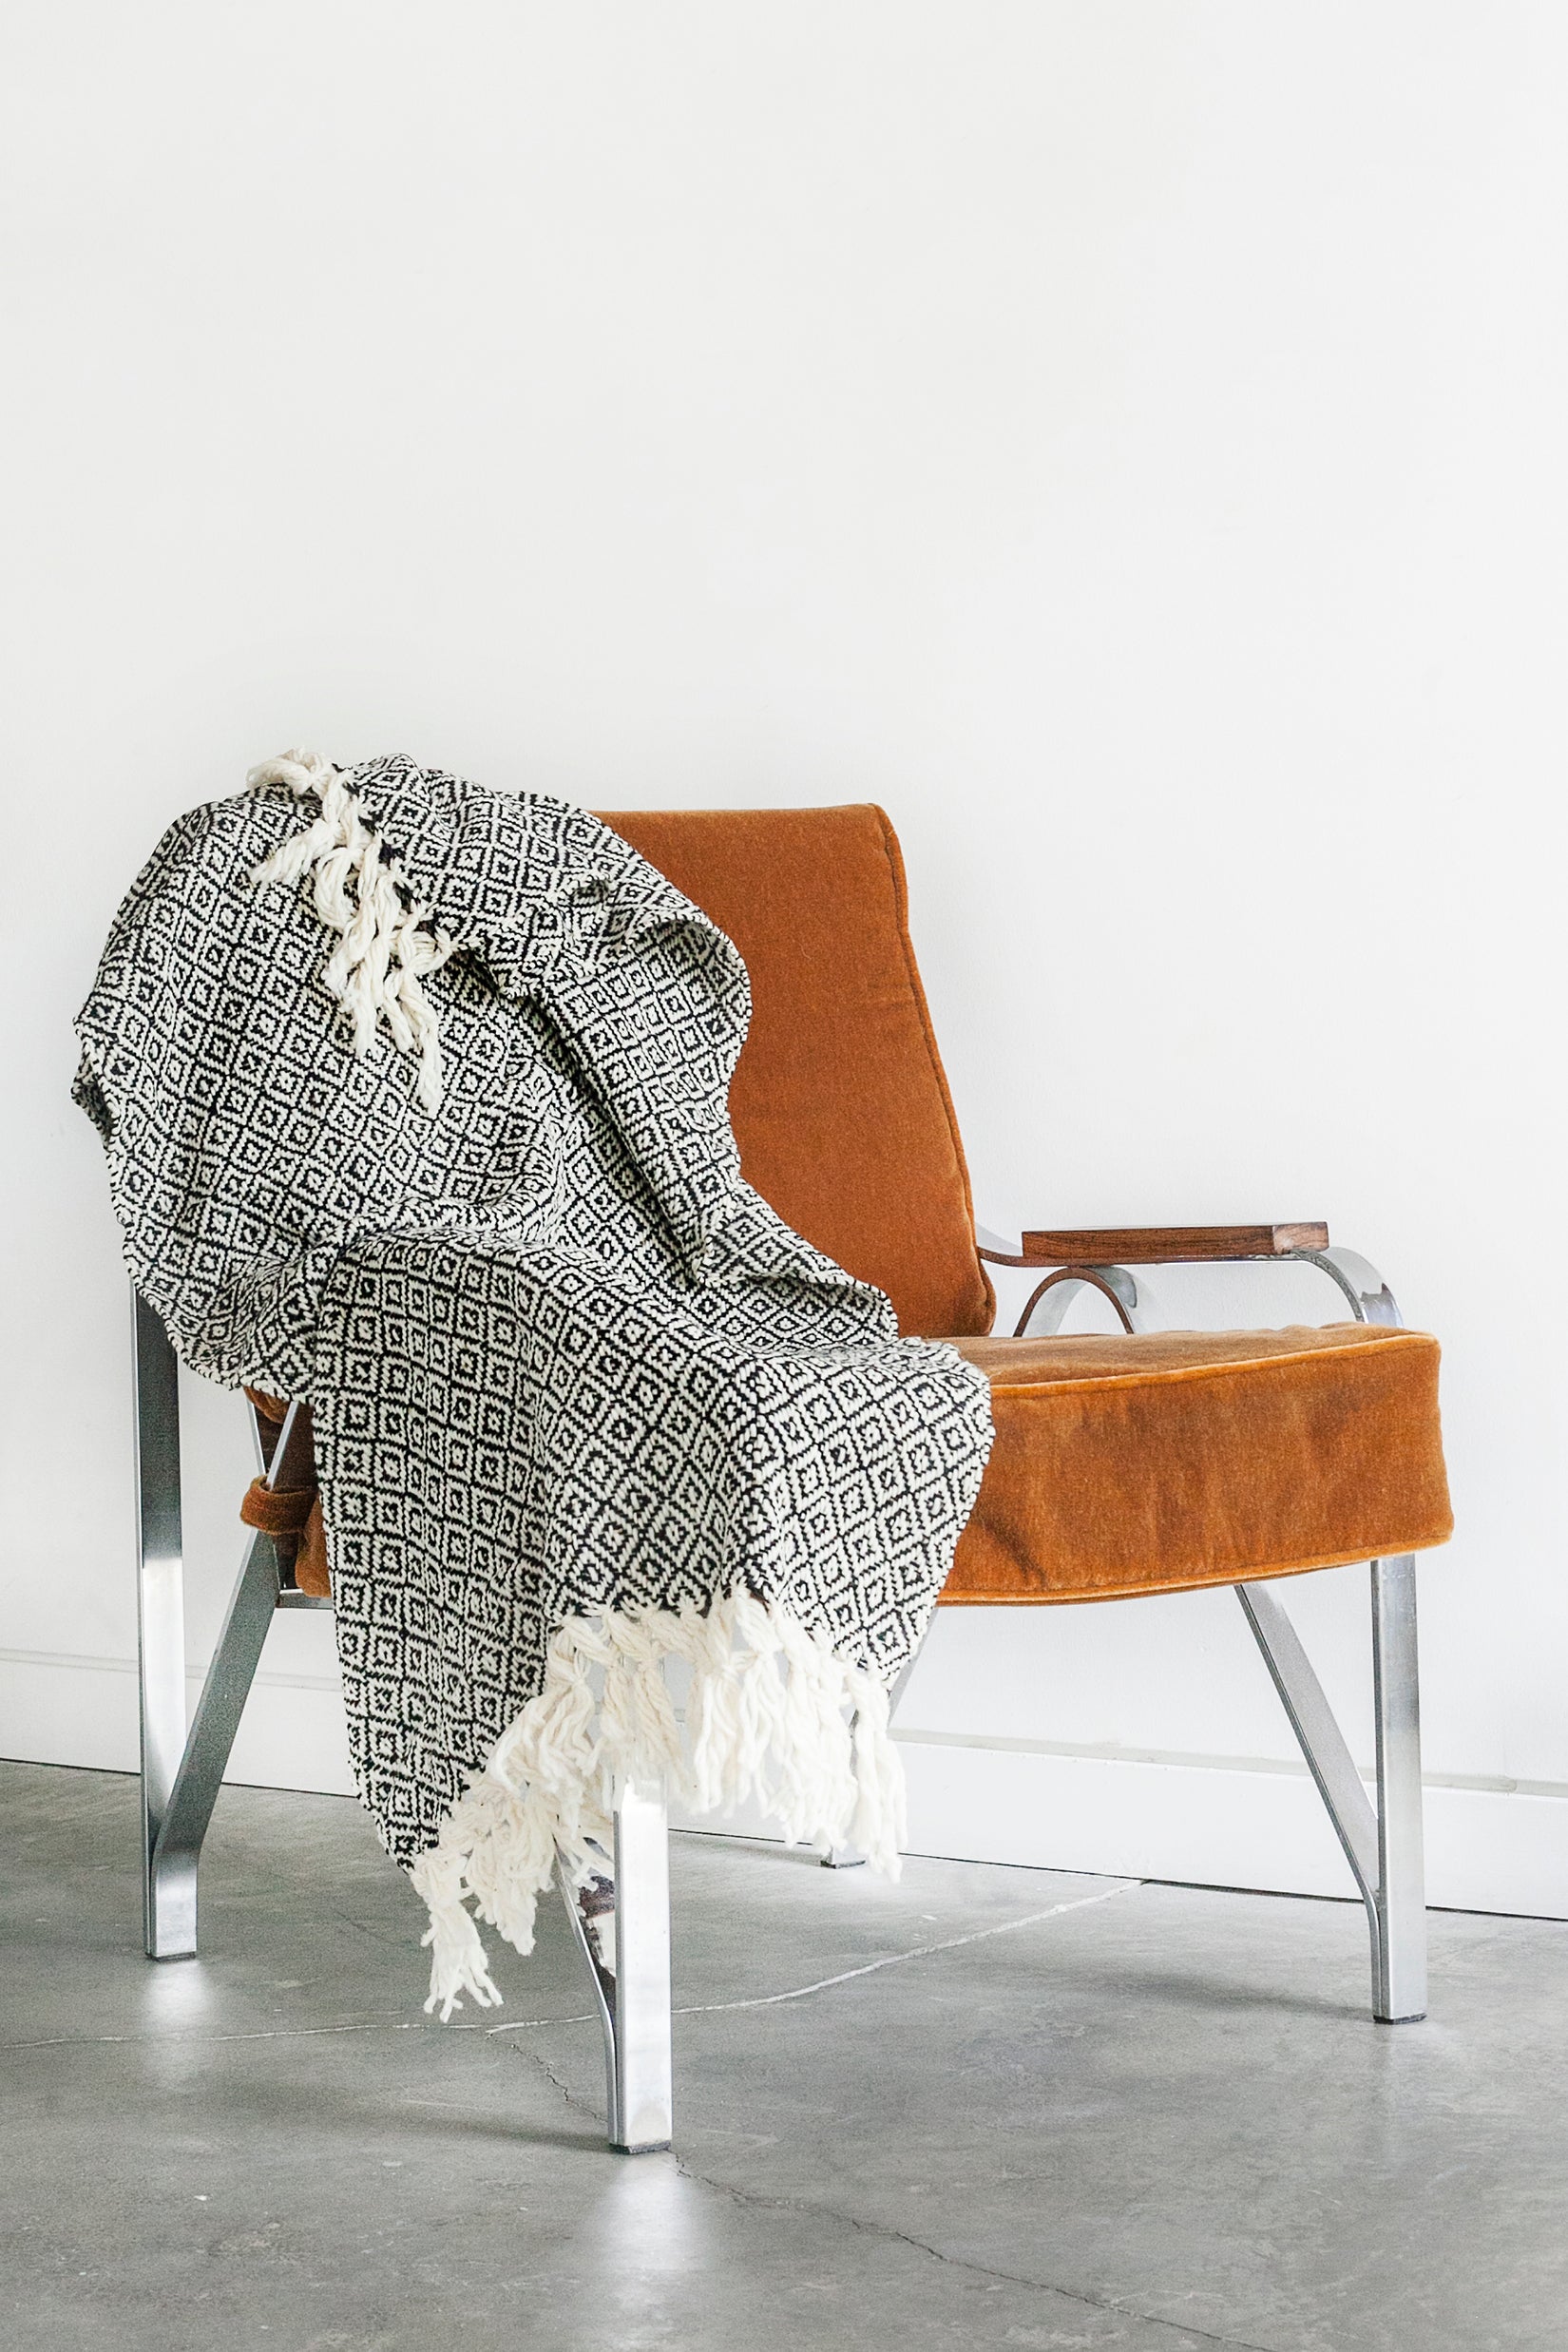 Black and white wool throw blanket woven in a diamond pattern with hand tied tassels at each end draped over a mid century modern chair